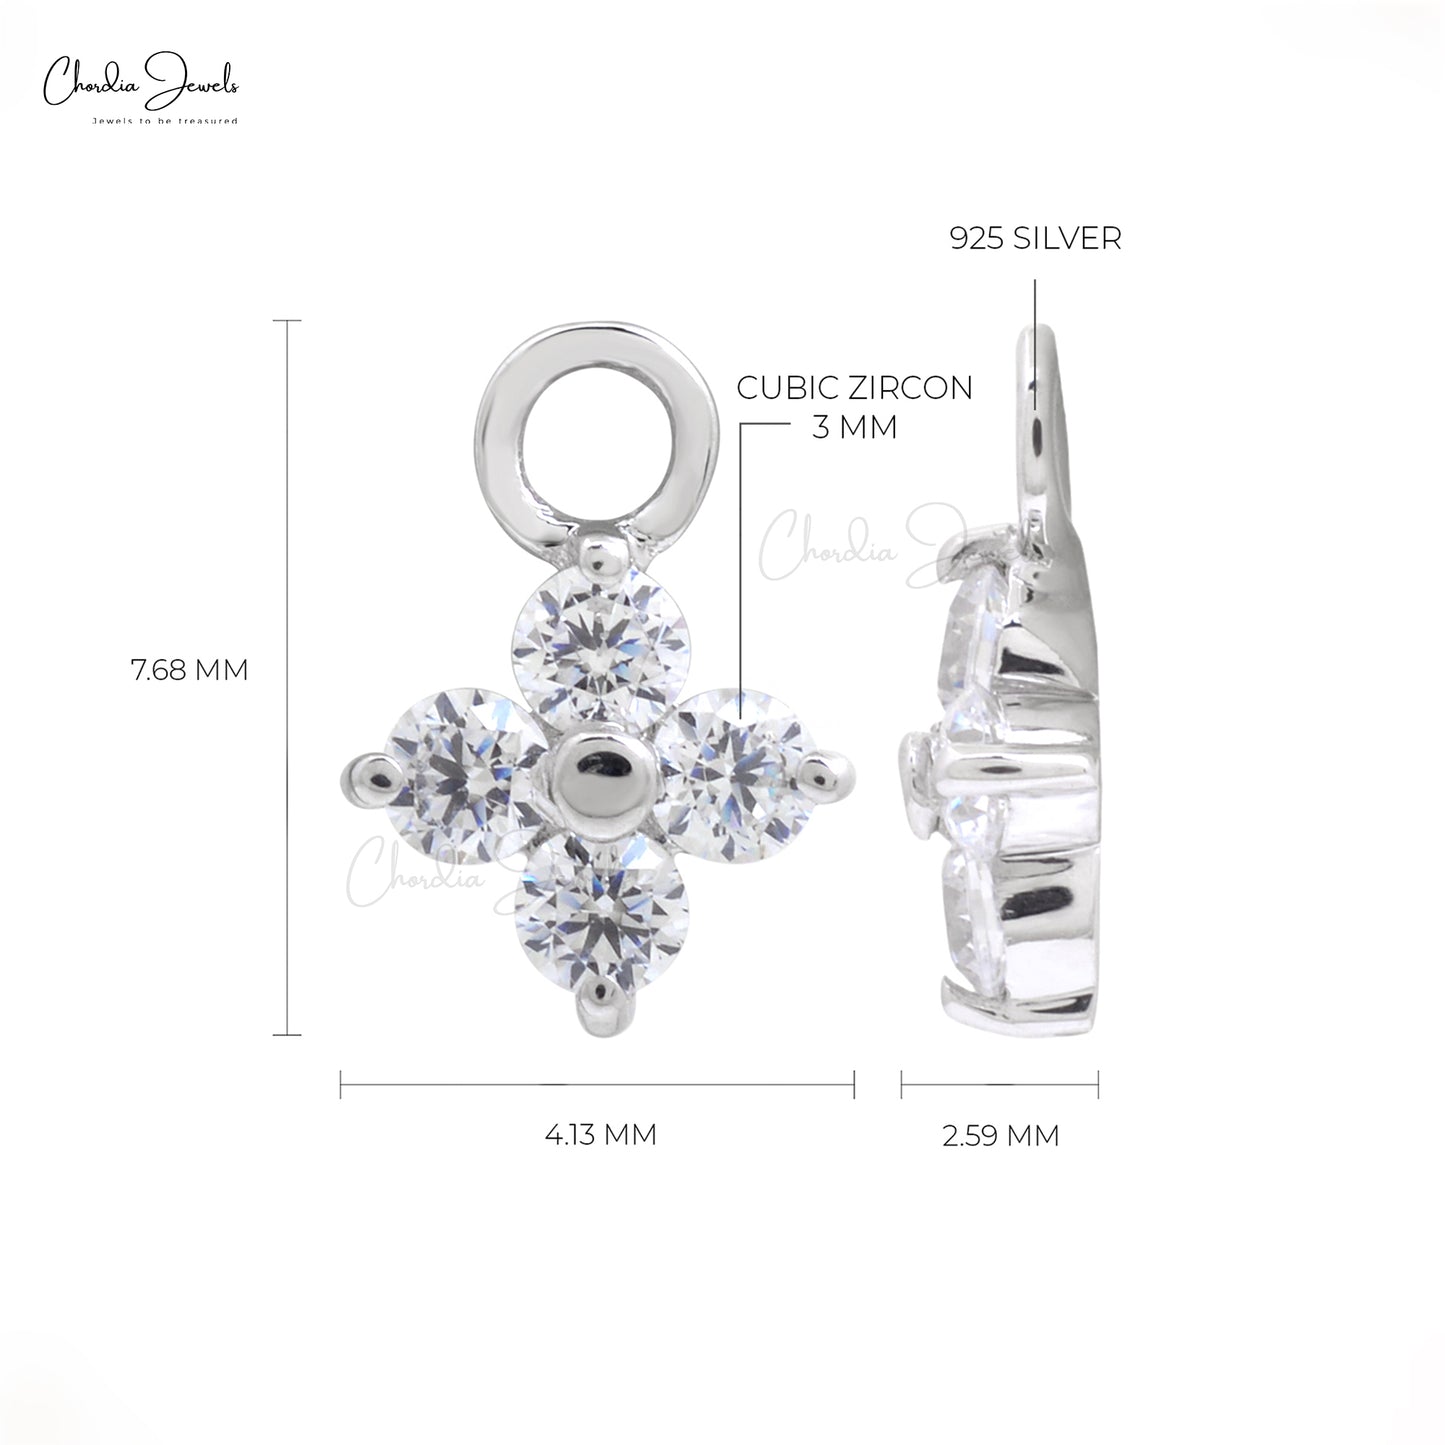 Load image into Gallery viewer, Top Quality 925 Sterling Silver Cubic Zircon Prong Charm Pendant Necklace Round Gemstone Jewelry At Discount Price
